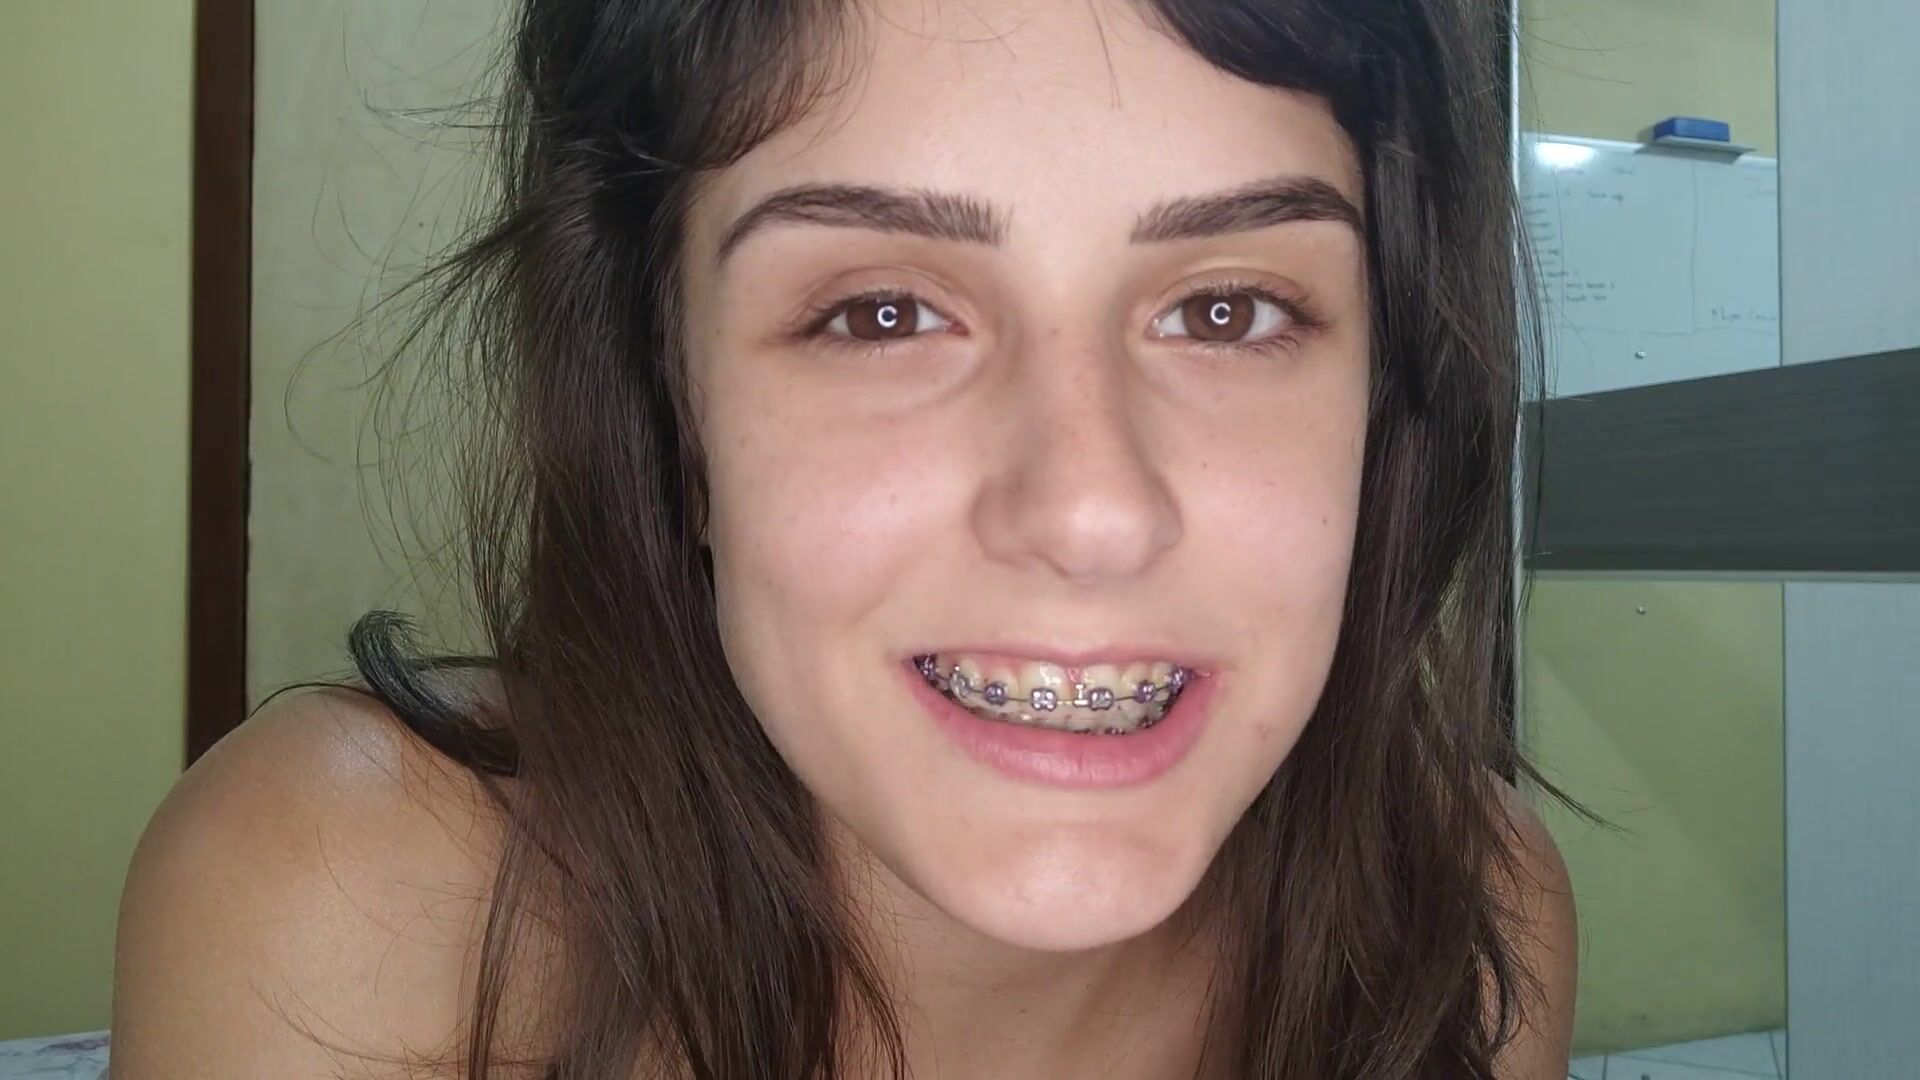 Babyface Amateur Sister With Braces And Hot Body